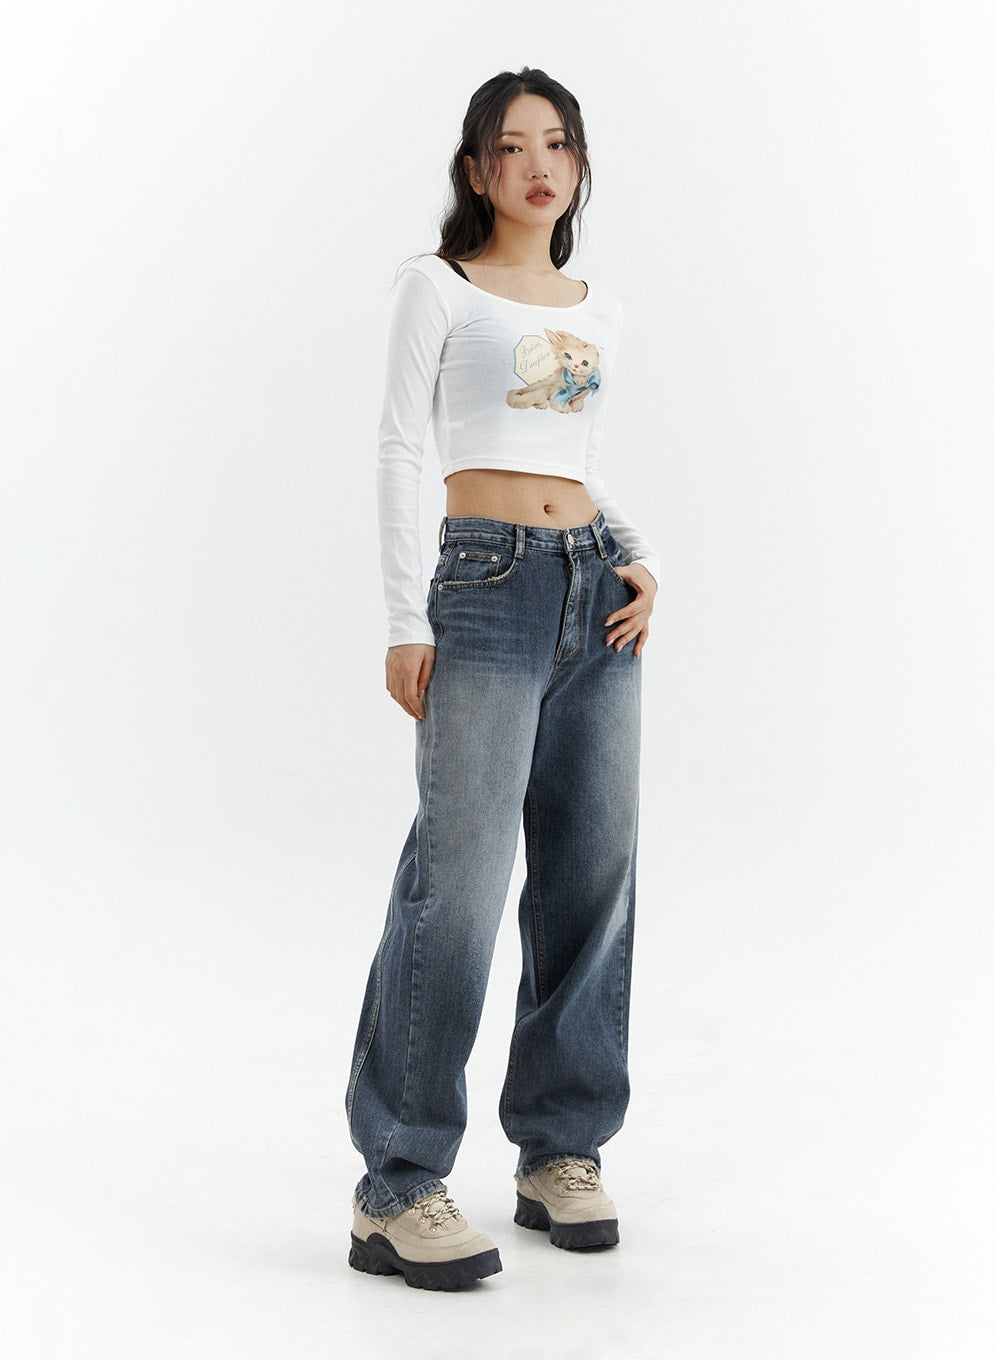 washed-button-straight-leg-jeans-cj425